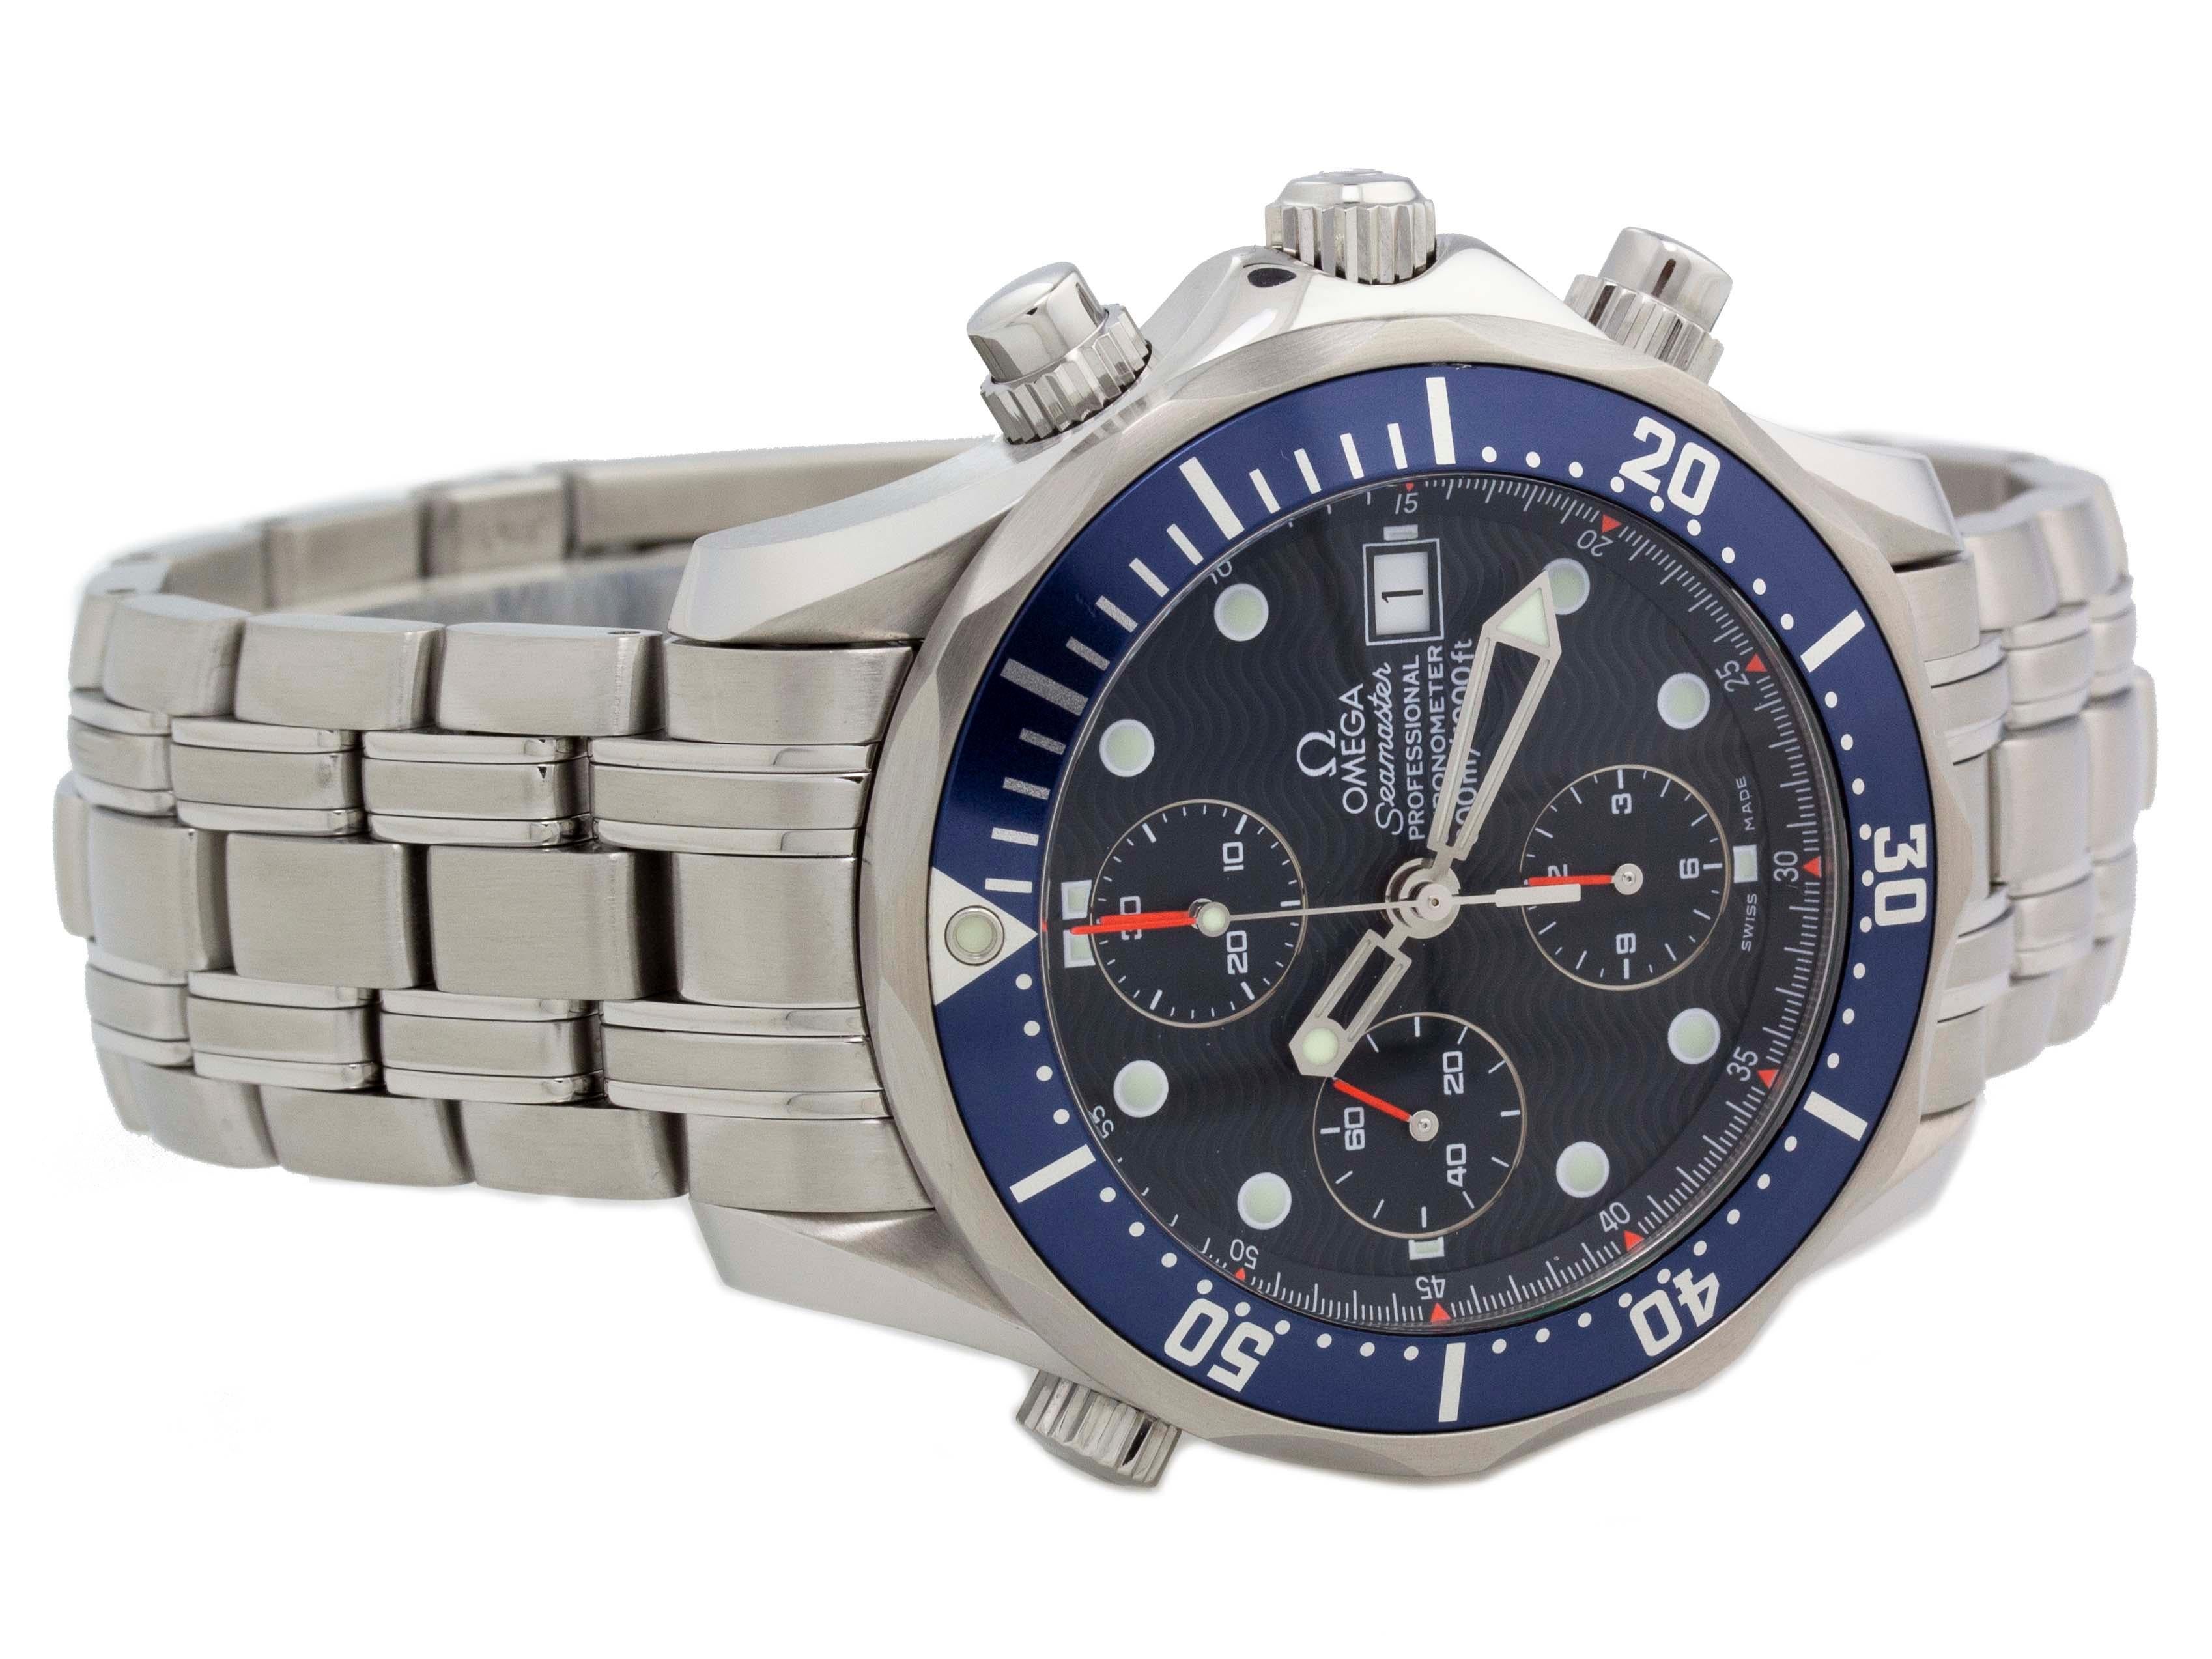 Omega Seamaster Diver 2599.80.00 In Excellent Condition For Sale In Willow Grove, PA